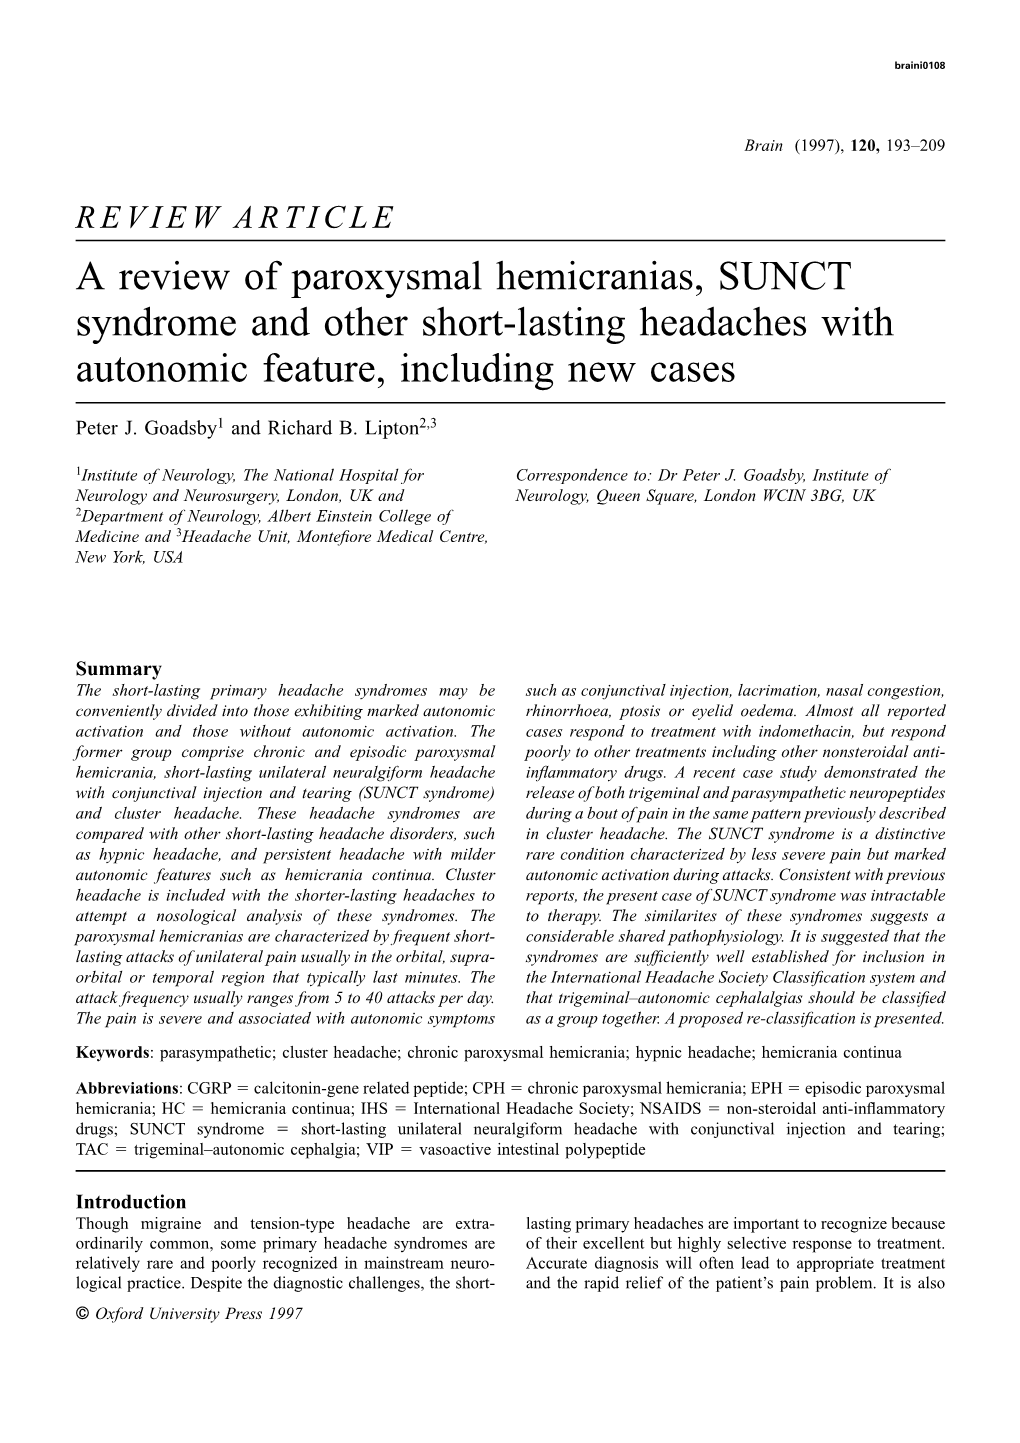 A Review of Paroxysmal Hemicranias, SUNCT Syndrome and Other Short-Lasting Headaches with Autonomic Feature, Including New Cases